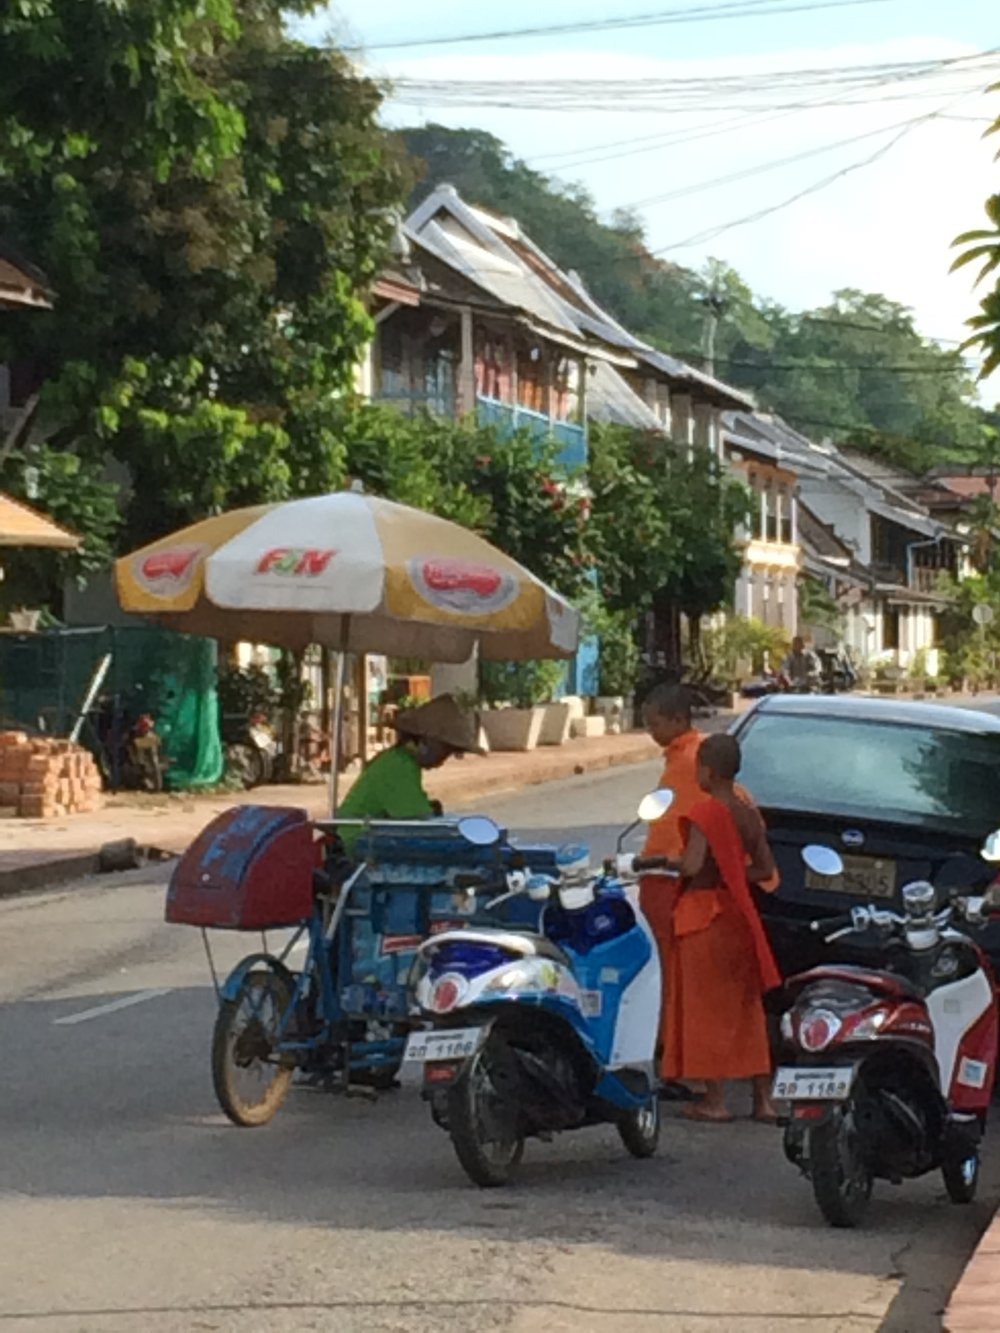 So monks can get ice cream, listen to ipods, and take selfies?